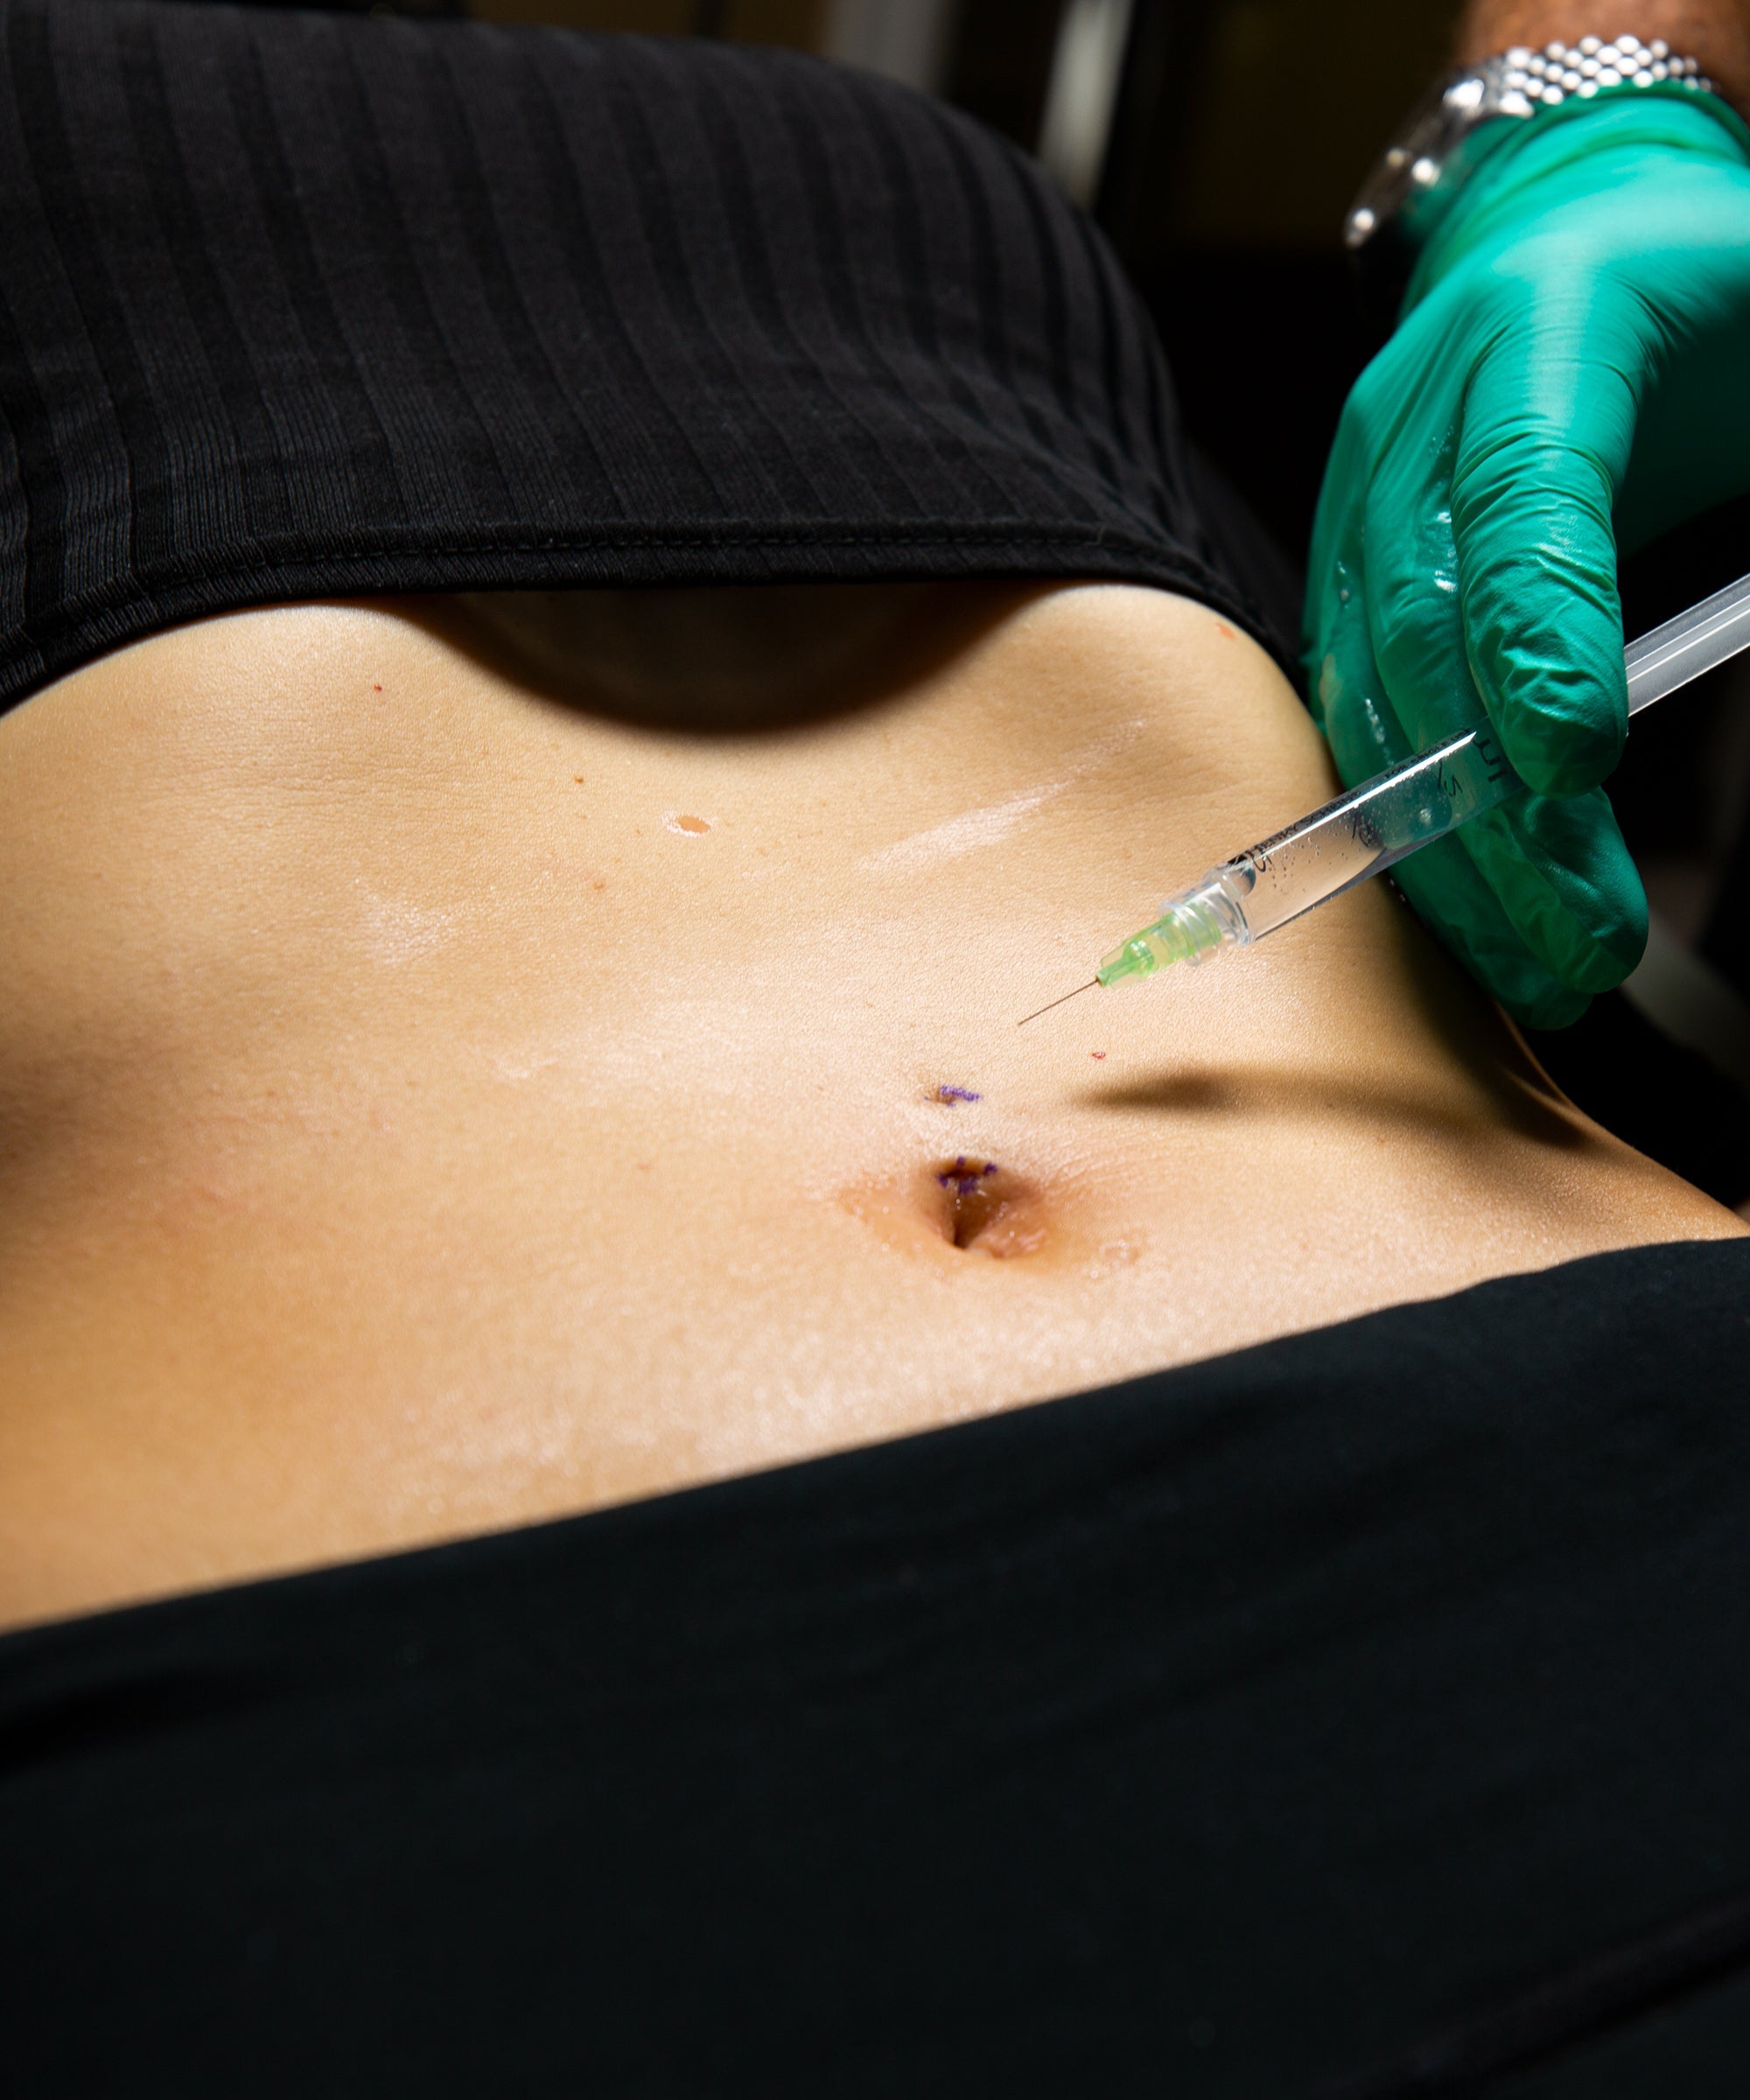 Belly Button Piercing Revision: How To Remove My Scar